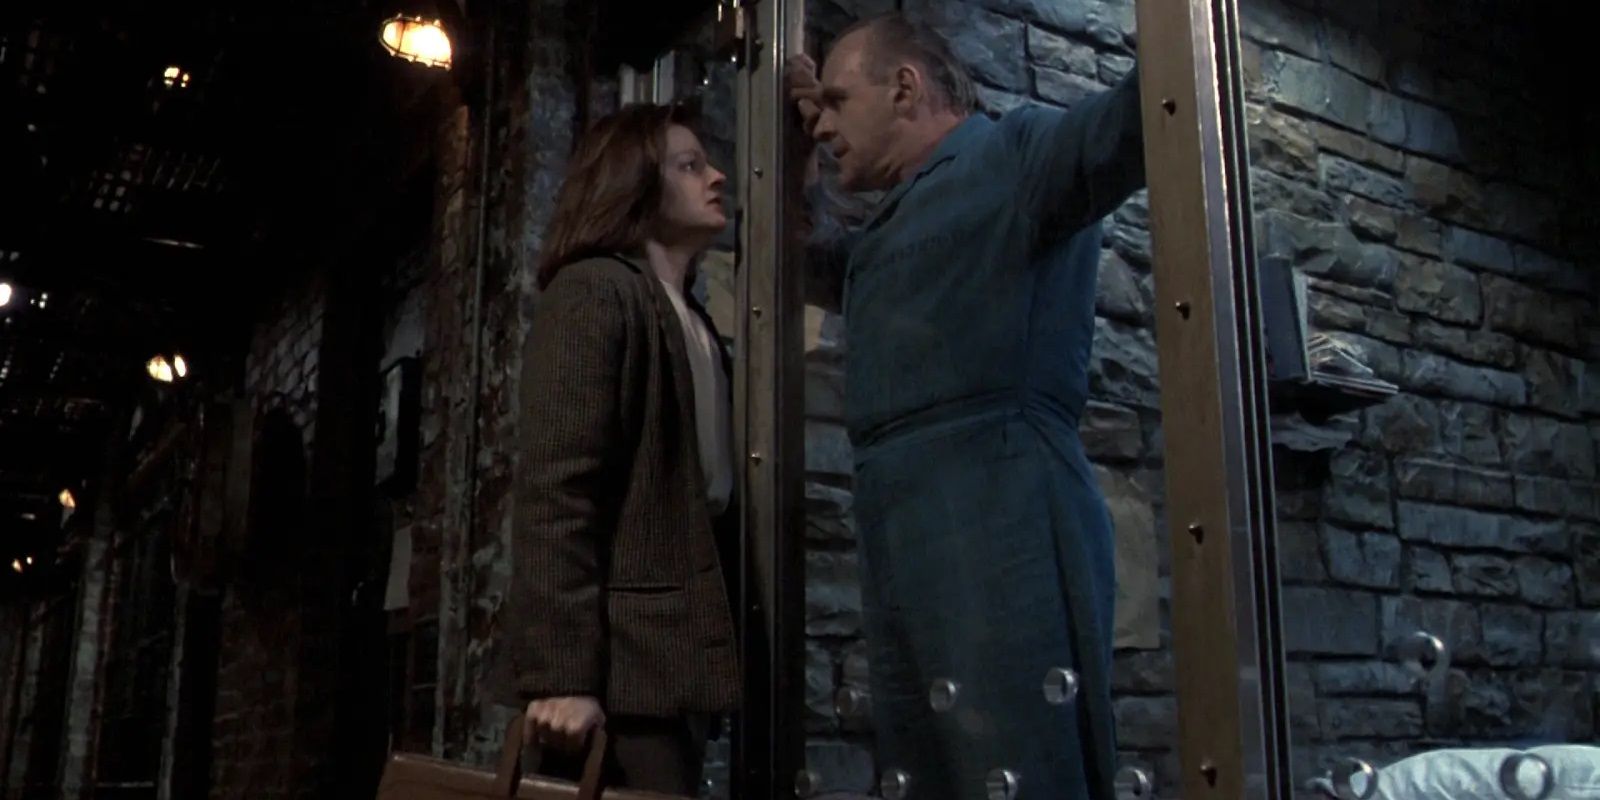 Jodie Foster and Anthony Hopkins speaking through a glass wall in The Silence of the Lambs